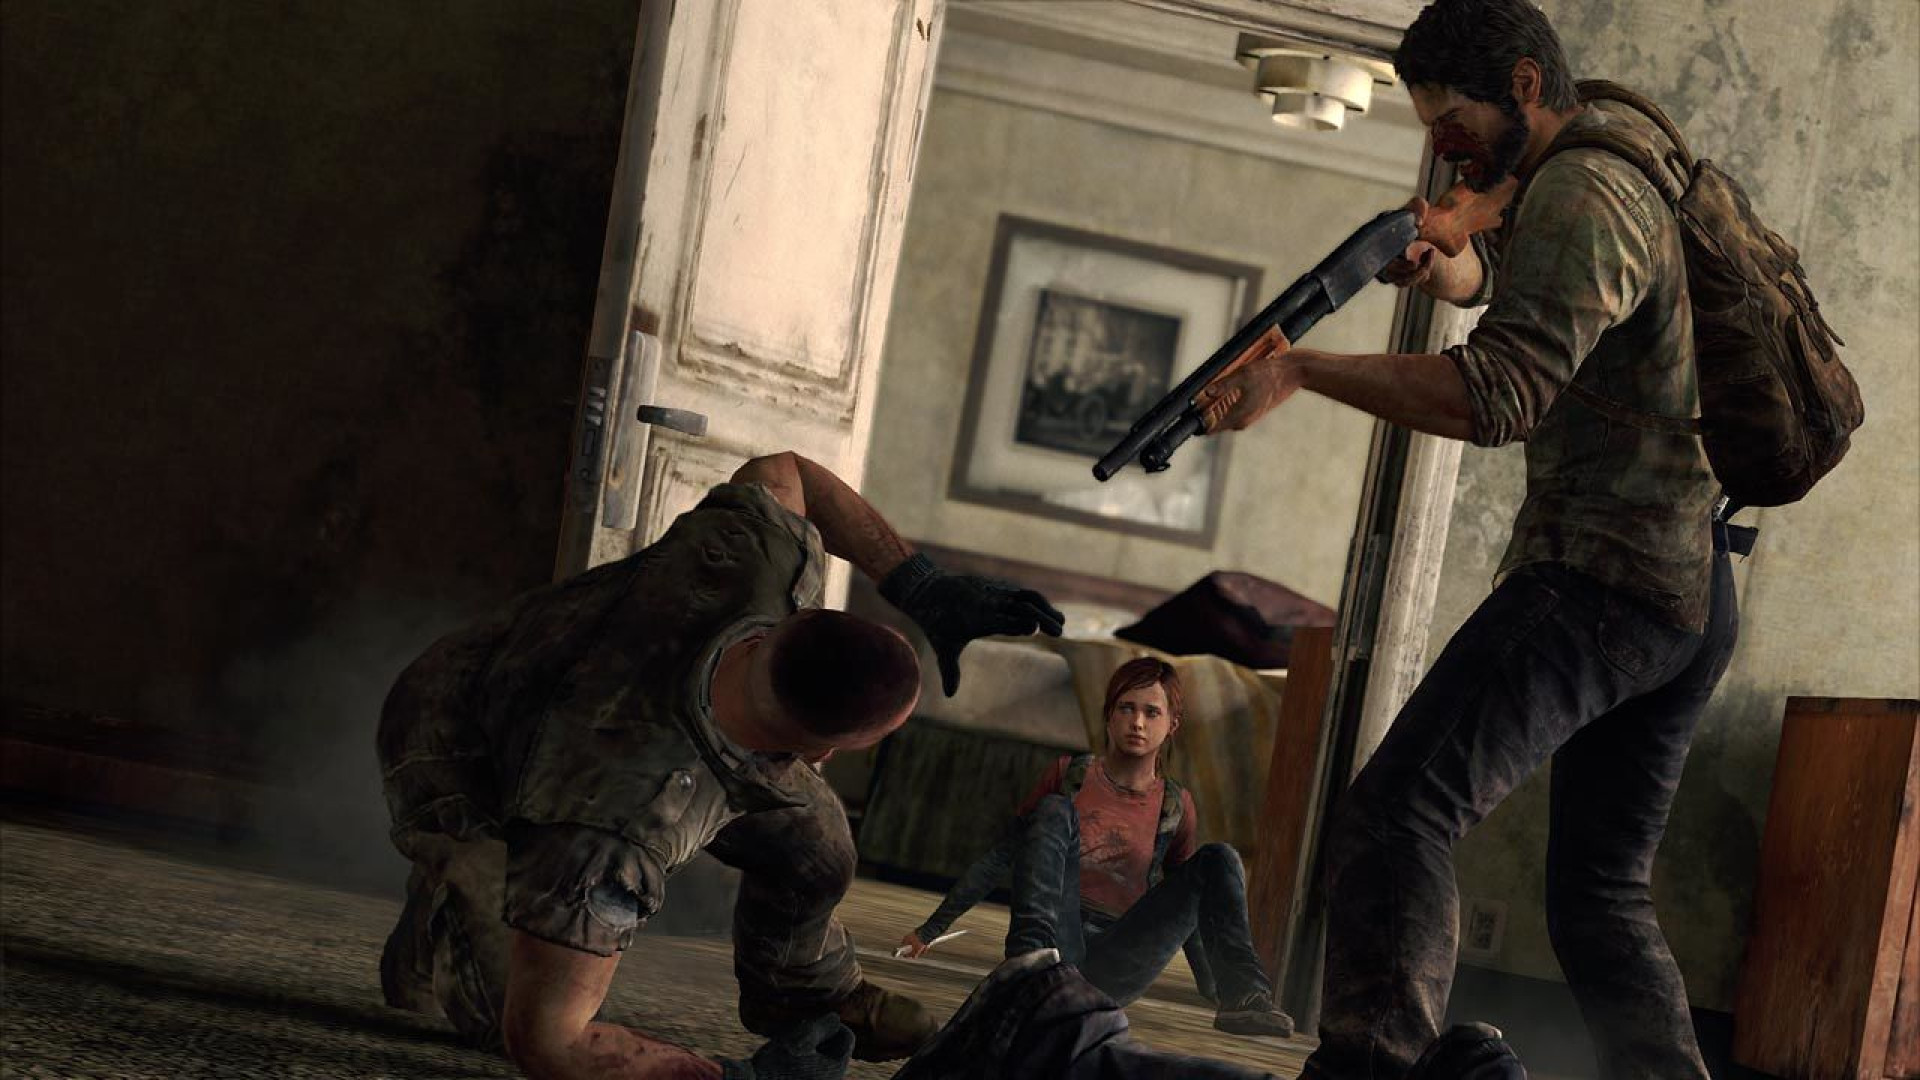 The last of us. The last of us игра. The last of us 1. The last of us 2013.